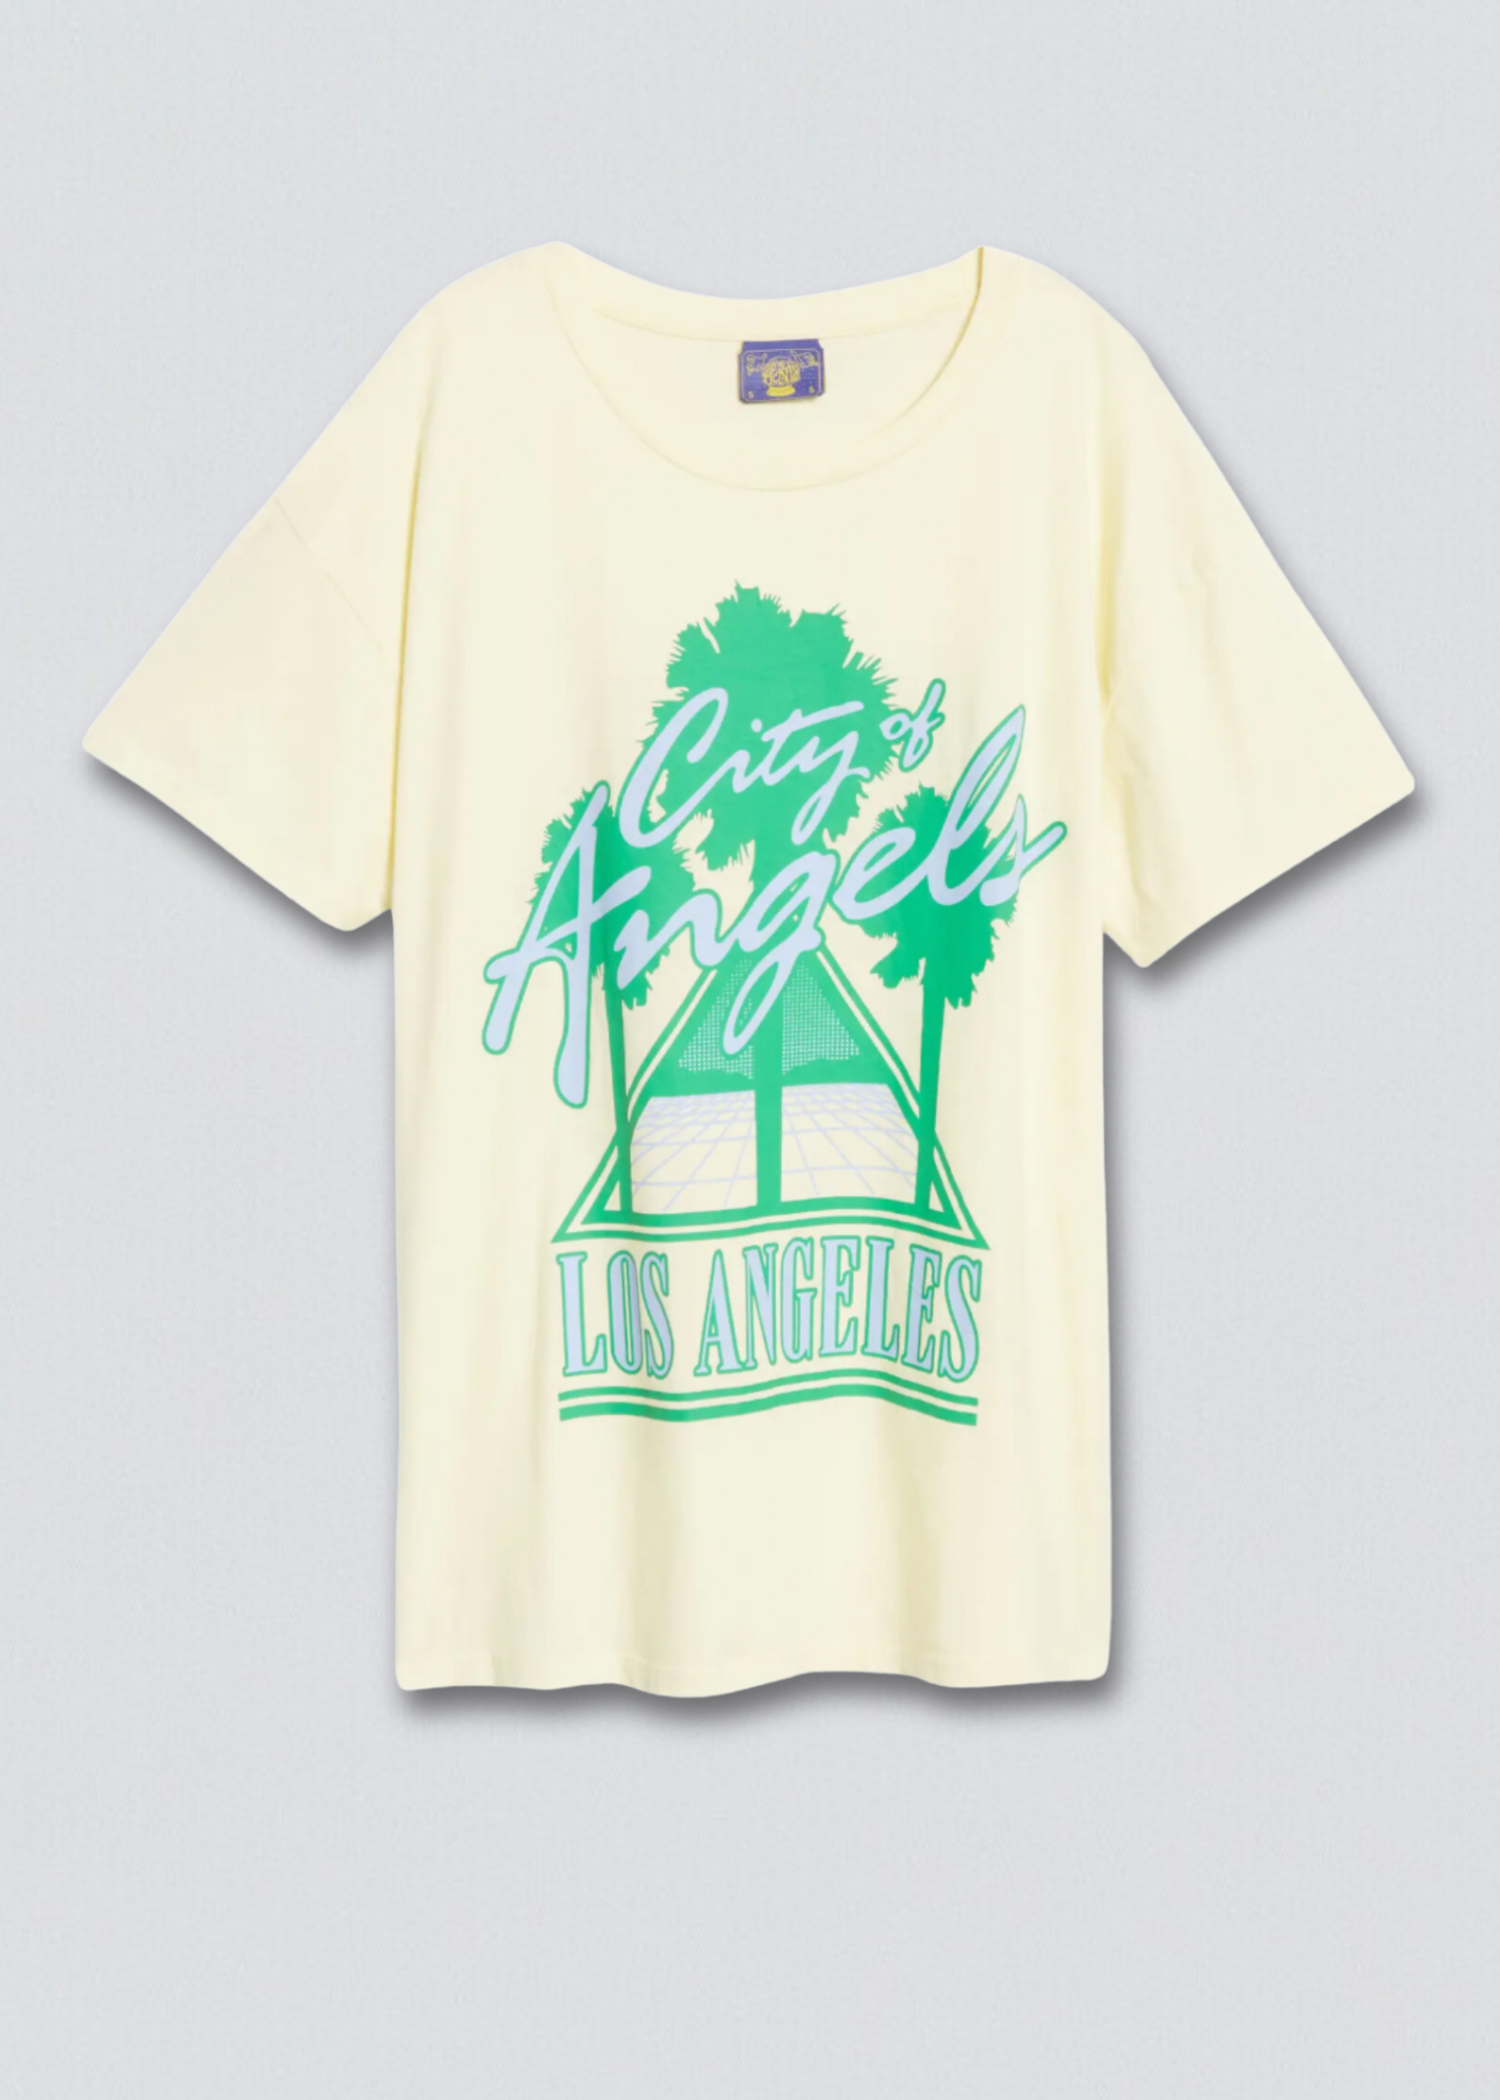 City of Angels Graphic Short Sleeve Tee